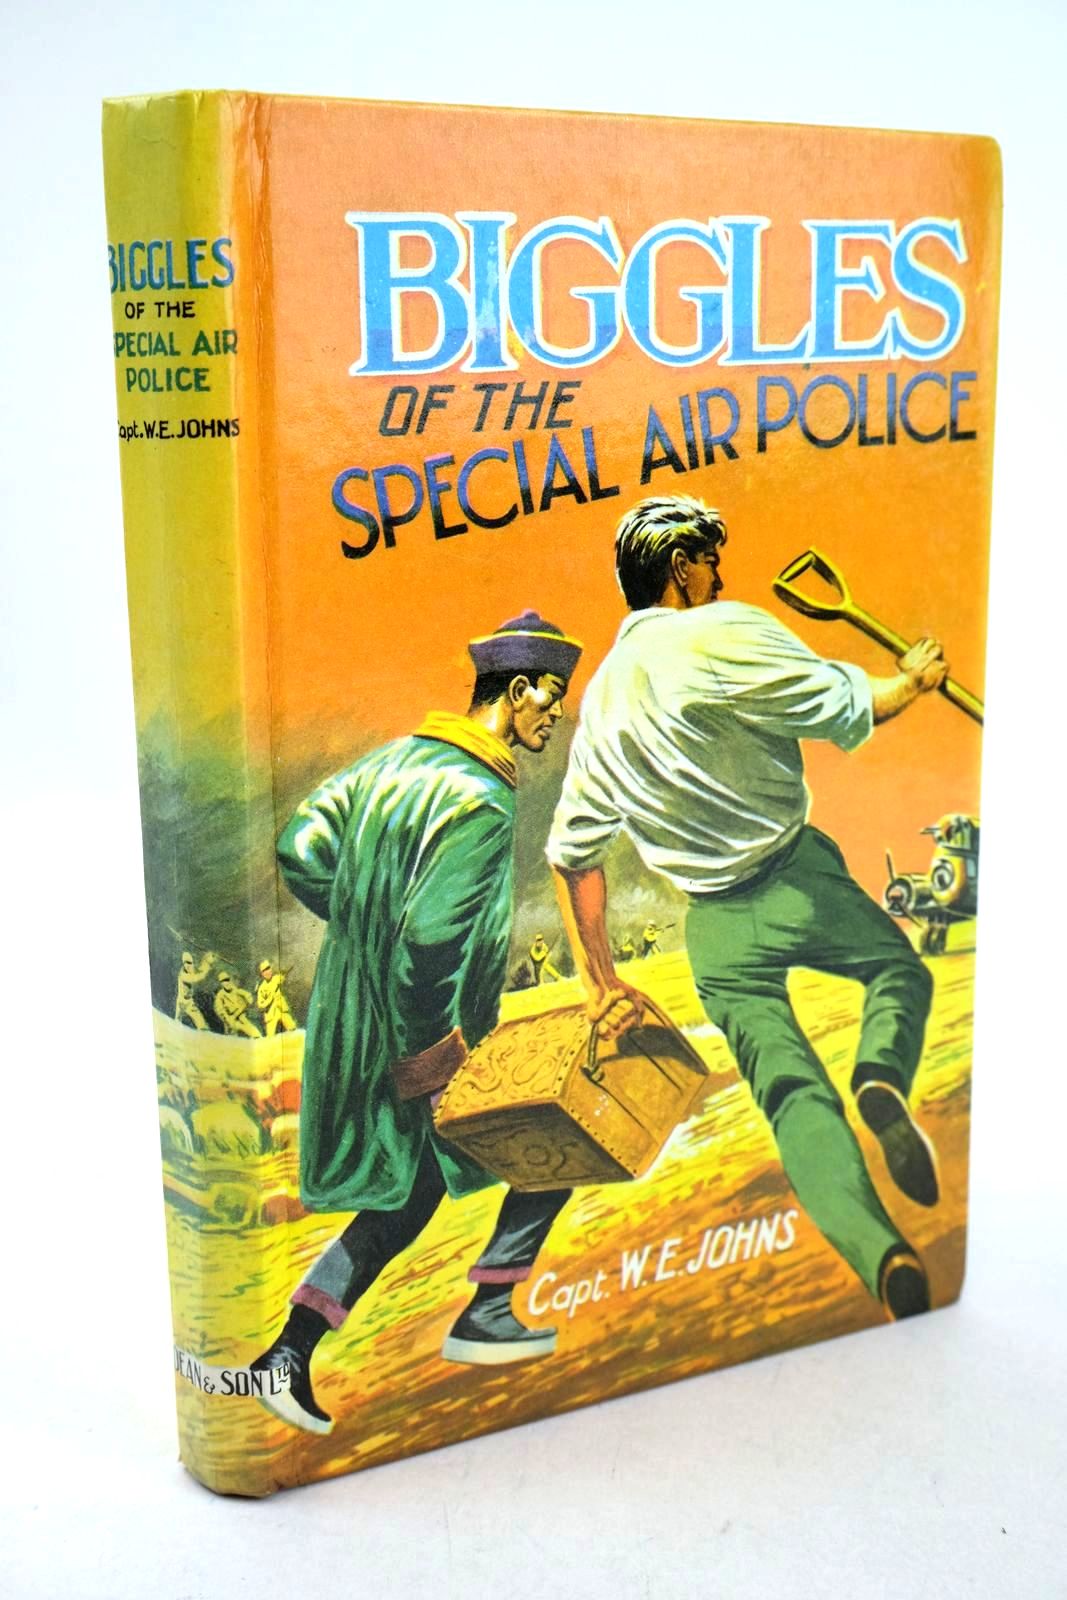 Photo of BIGGLES OF THE SPECIAL AIR POLICE written by Johns, W.E. published by Dean &amp; Son Ltd. (STOCK CODE: 1326589)  for sale by Stella & Rose's Books